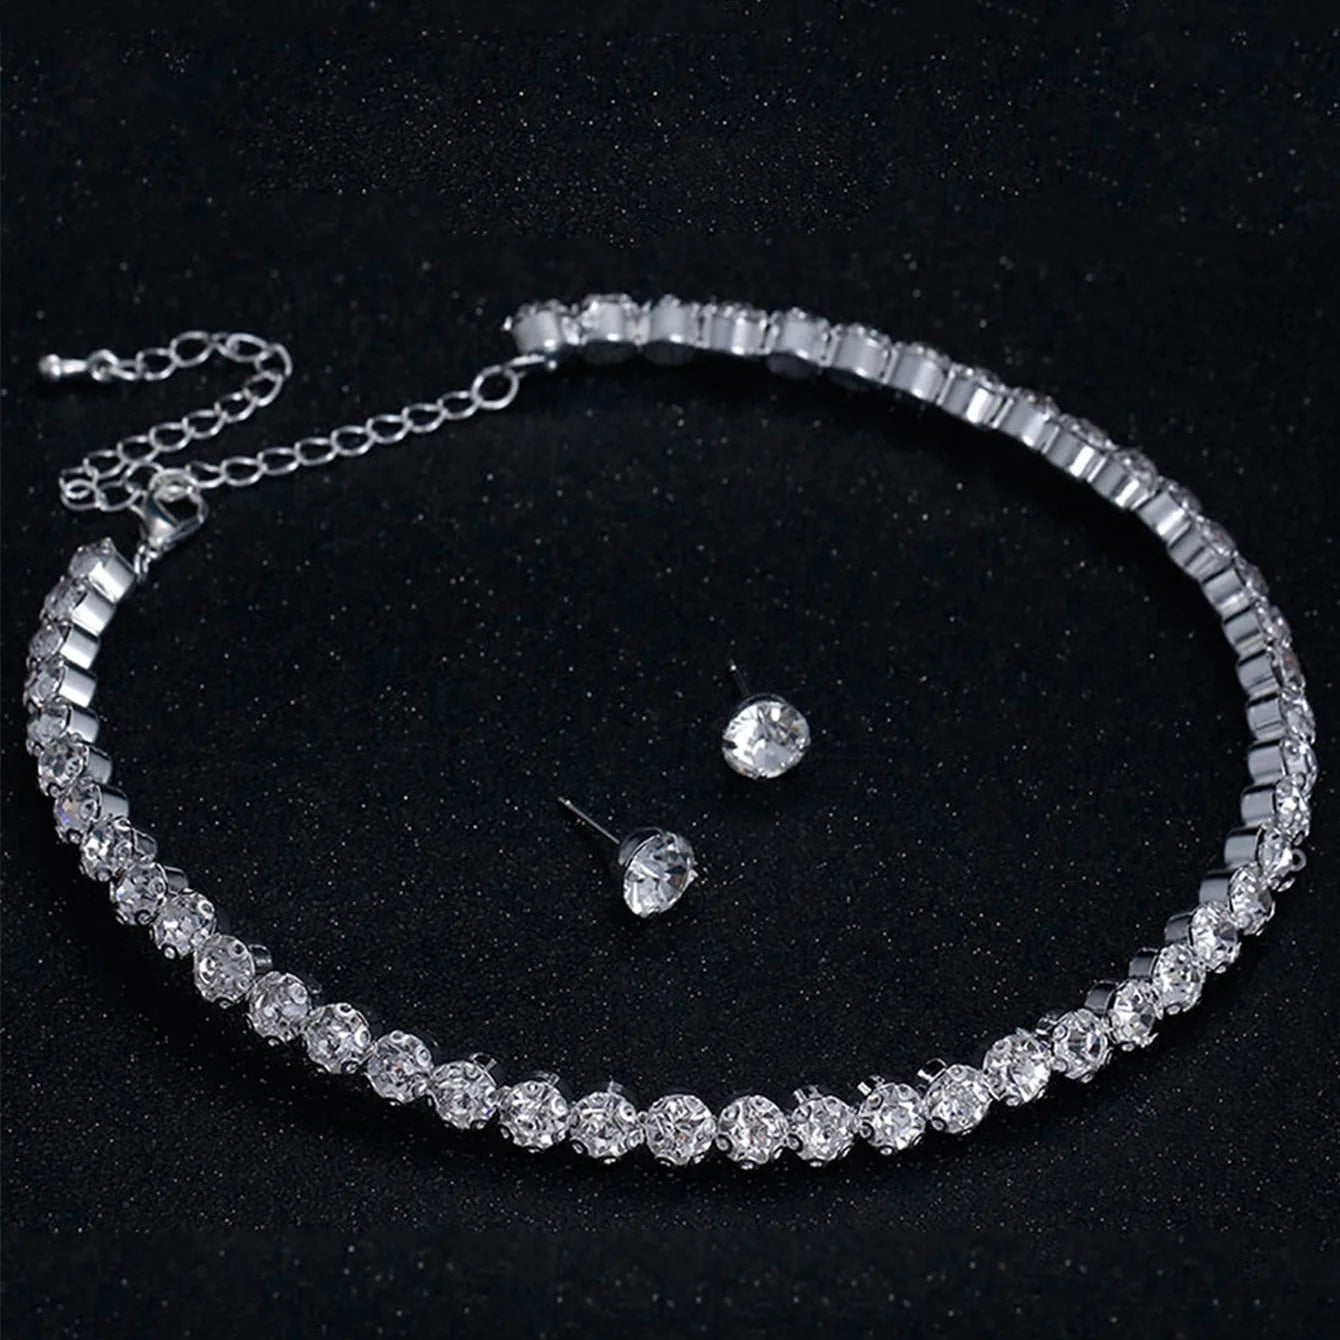 Luxury Round Crystal Jewelry Set for Women Charm Silver Color Bracelet Stud Earring Zircon Chain Necklace Wedding Party Jewelry